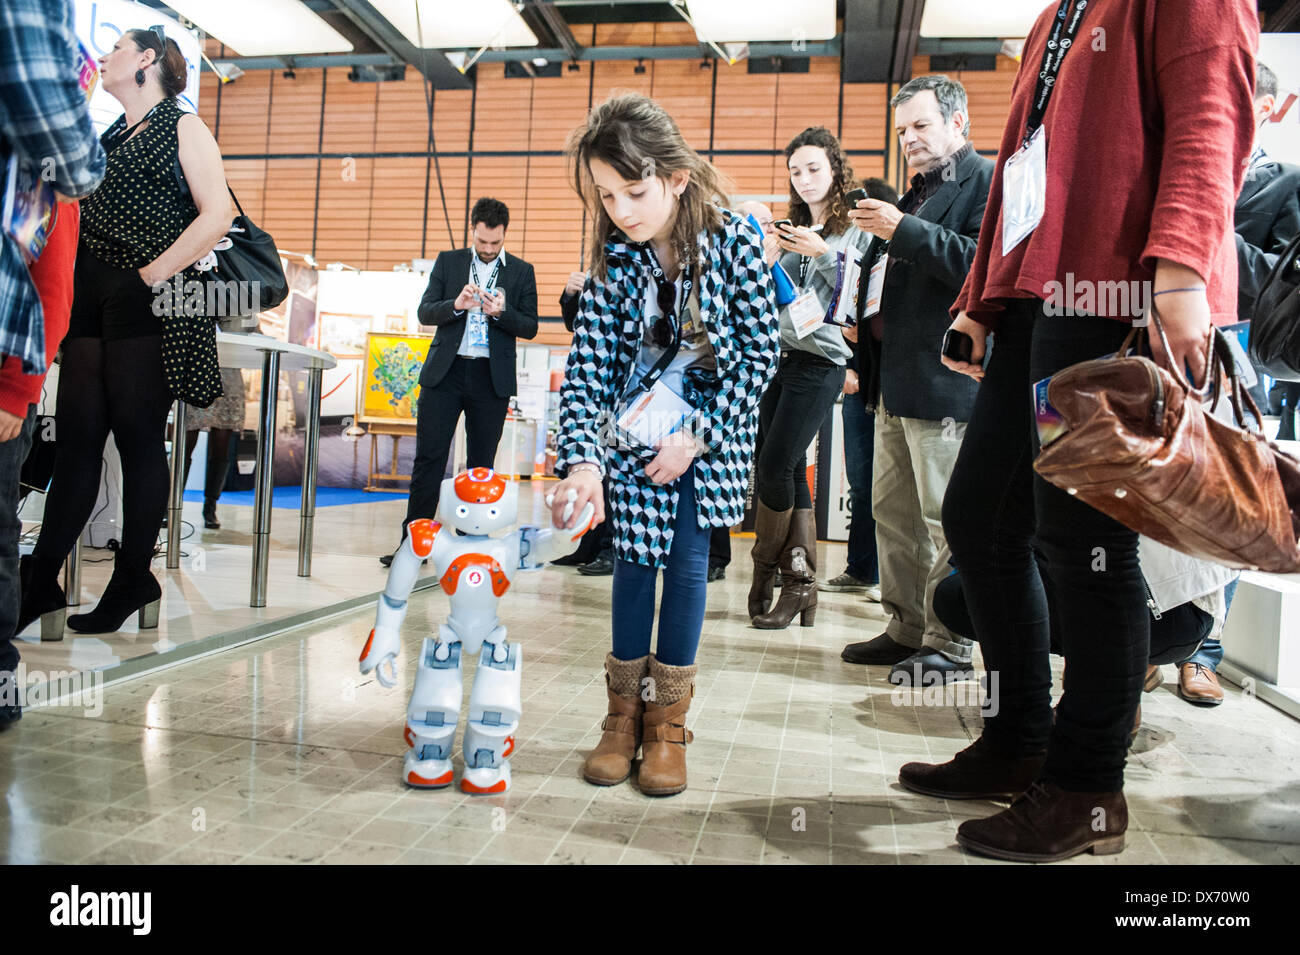 Lyon, France - 19 March 2014: Elora, 8, walks hand by hand with NAO Robot by Aldebaran at Innorobo 2014, the biggest fair in Europe for robotics. Credit:  Piero Cruciatti/Alamy Live News Stock Photo